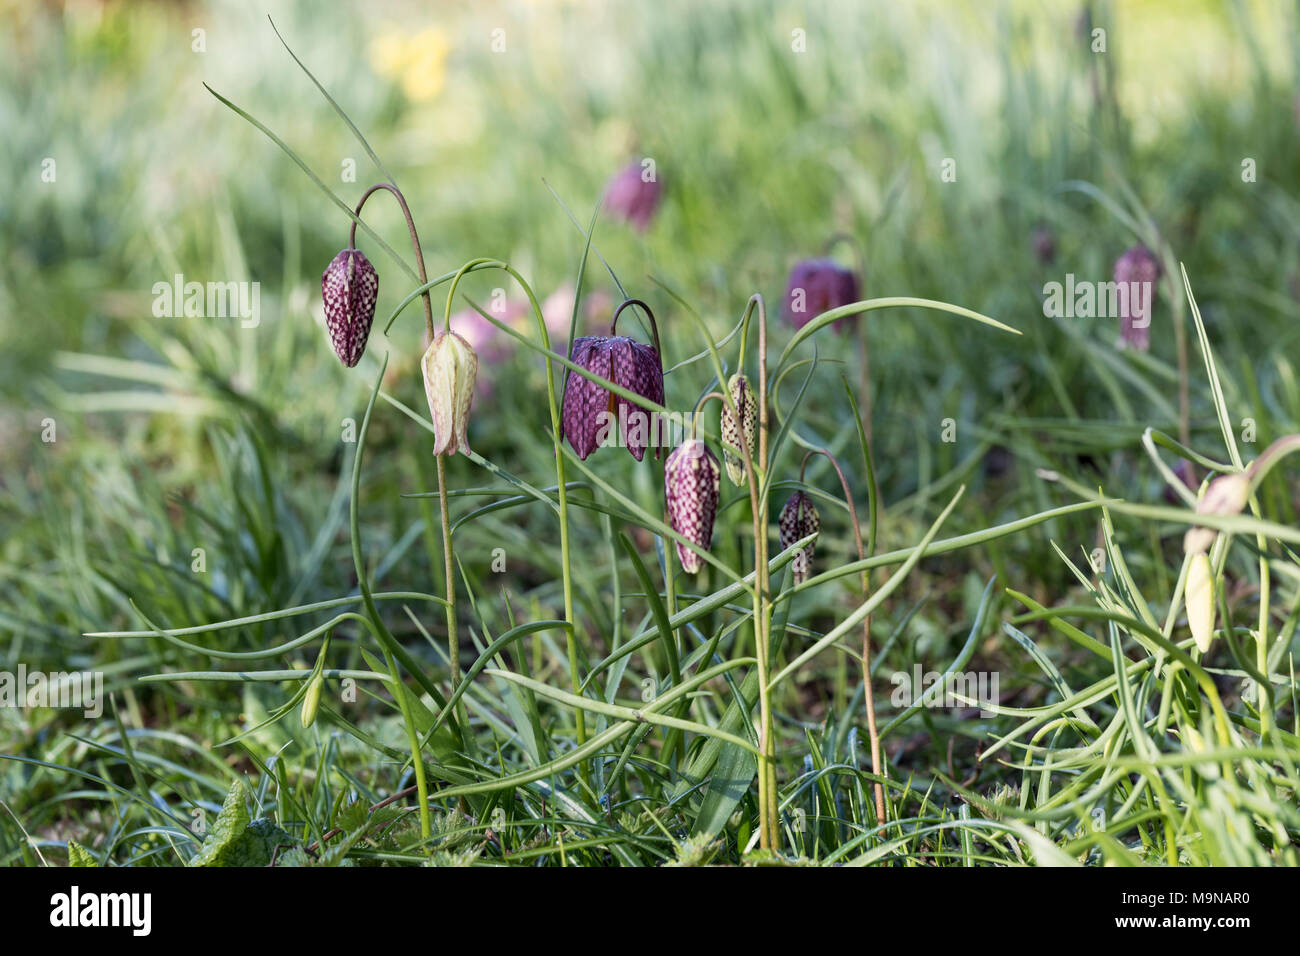 Close up of Fritillaria meleagris / Snakes Head Fritillary flowering in an English meadow, UK Stock Photo